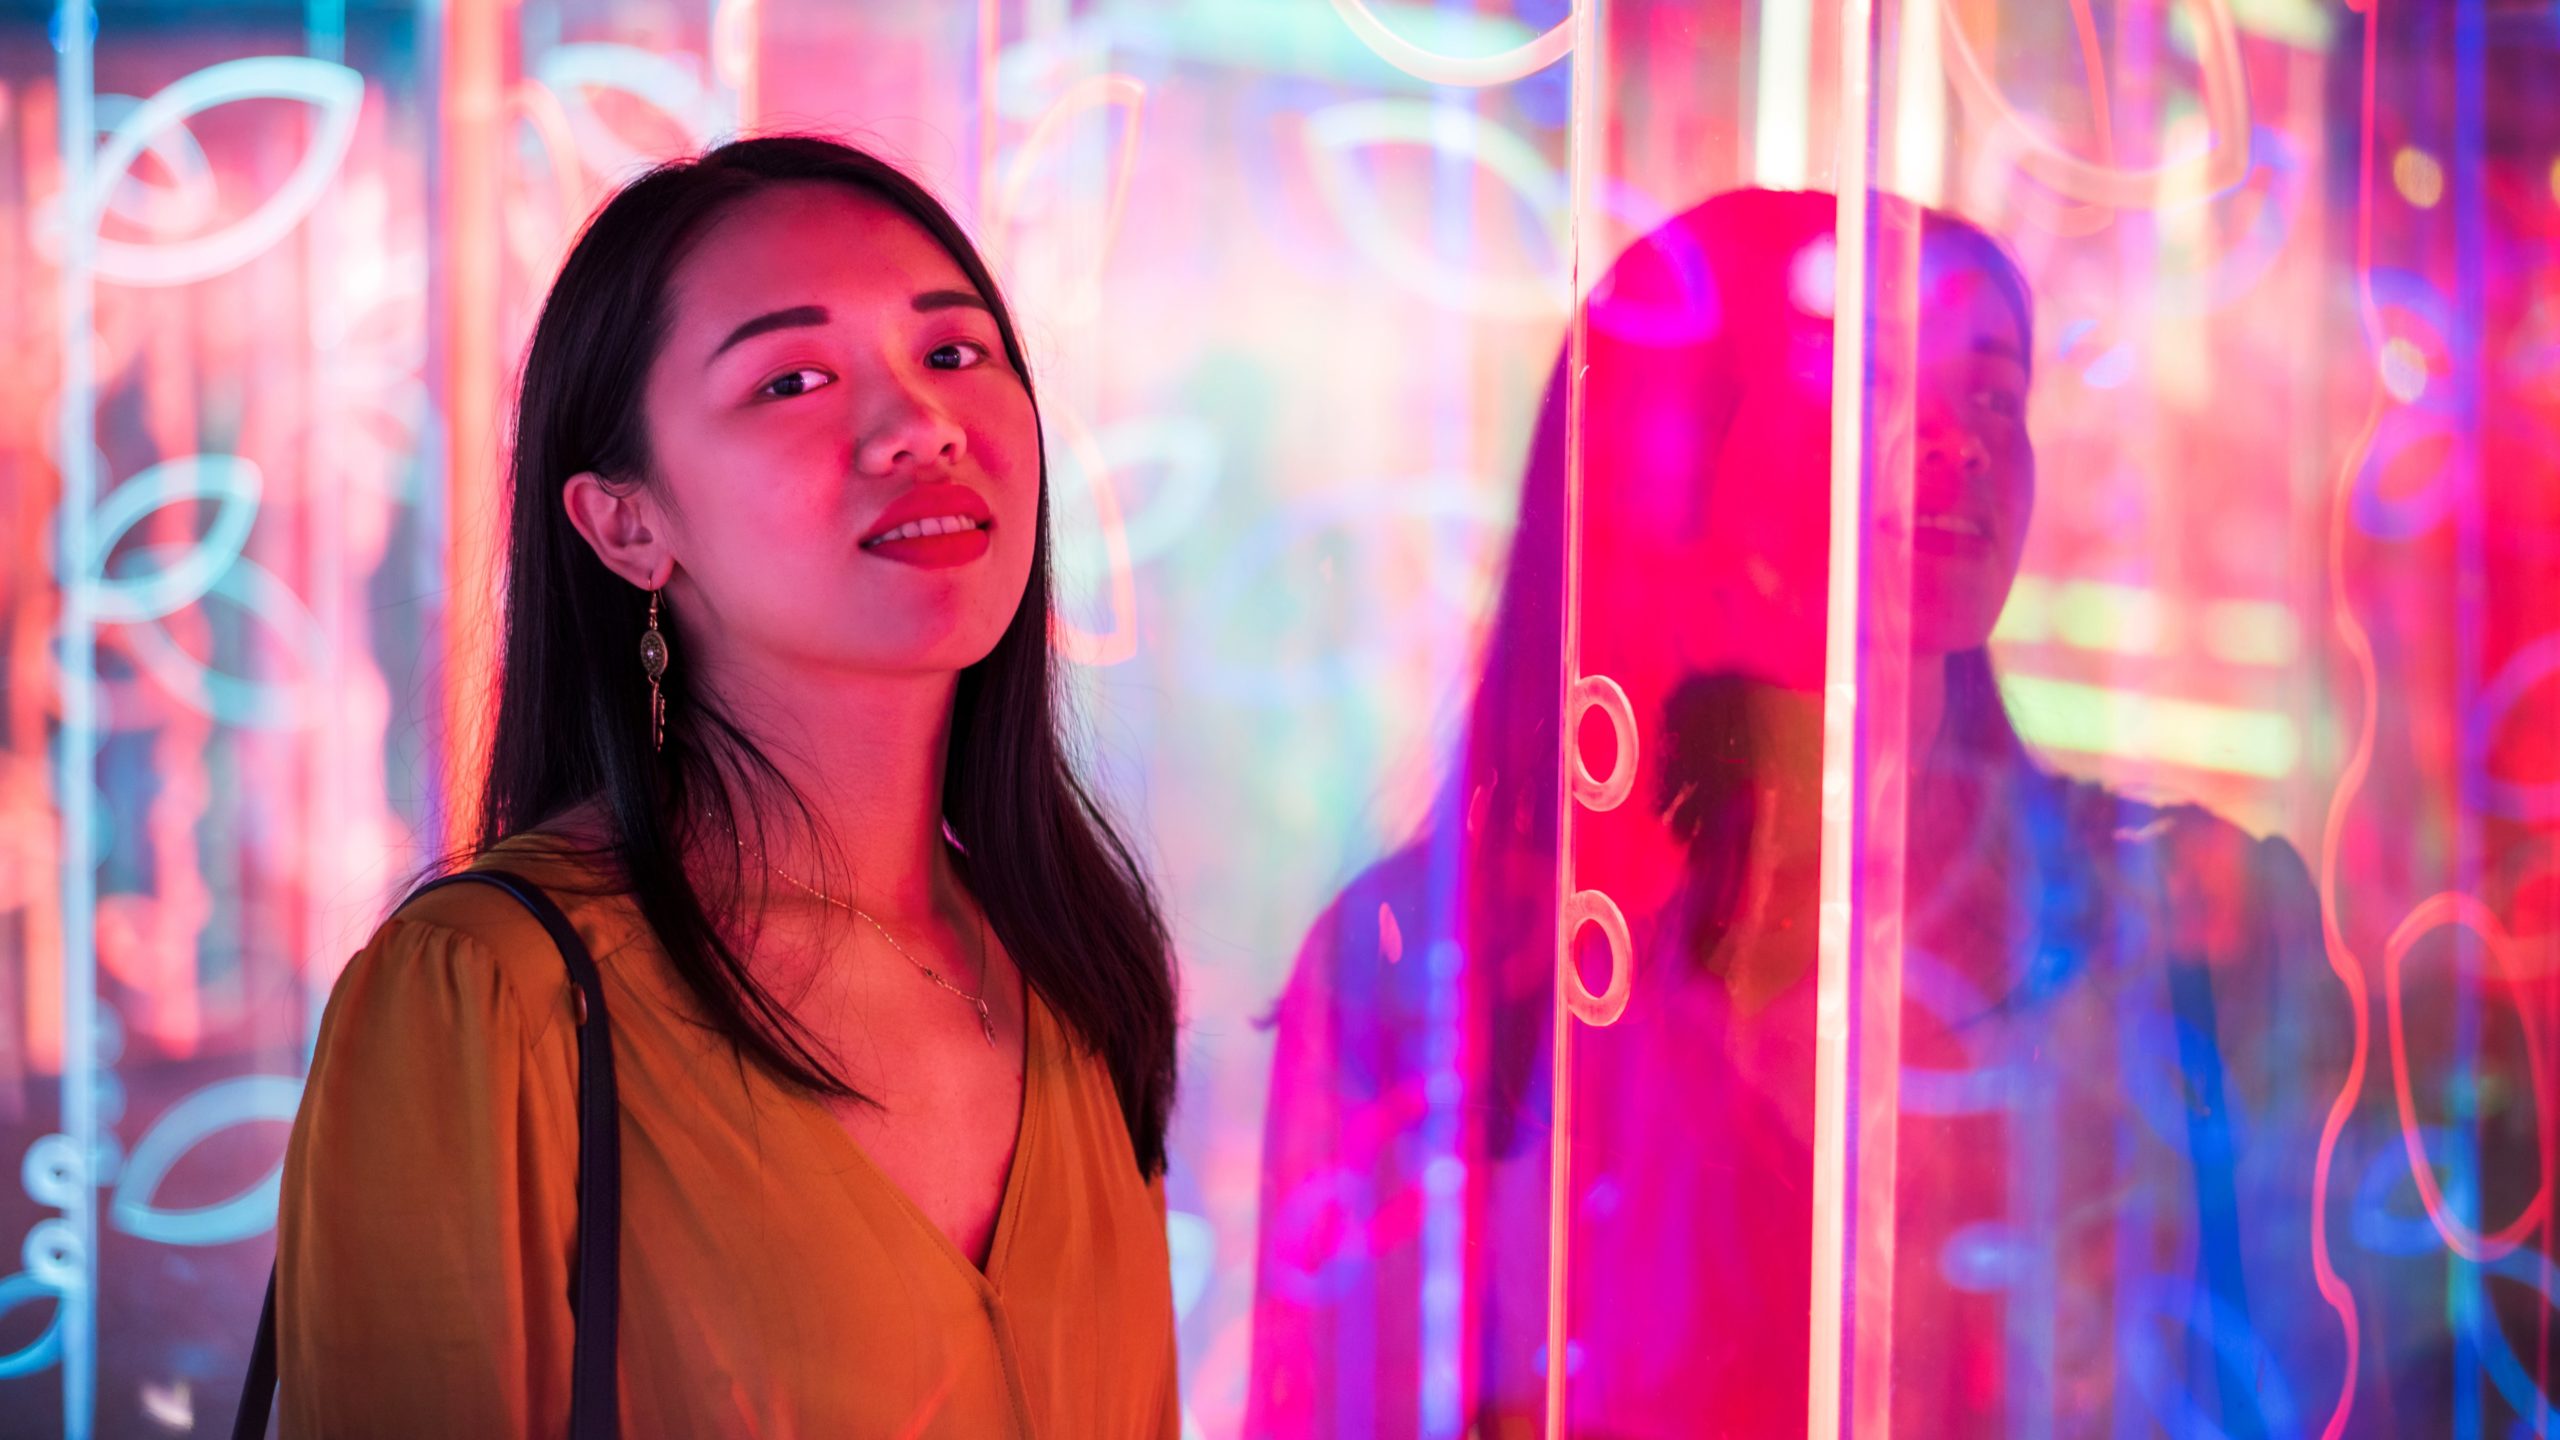 Asian woman portrait lit up by neon illuminated mirrors at night.